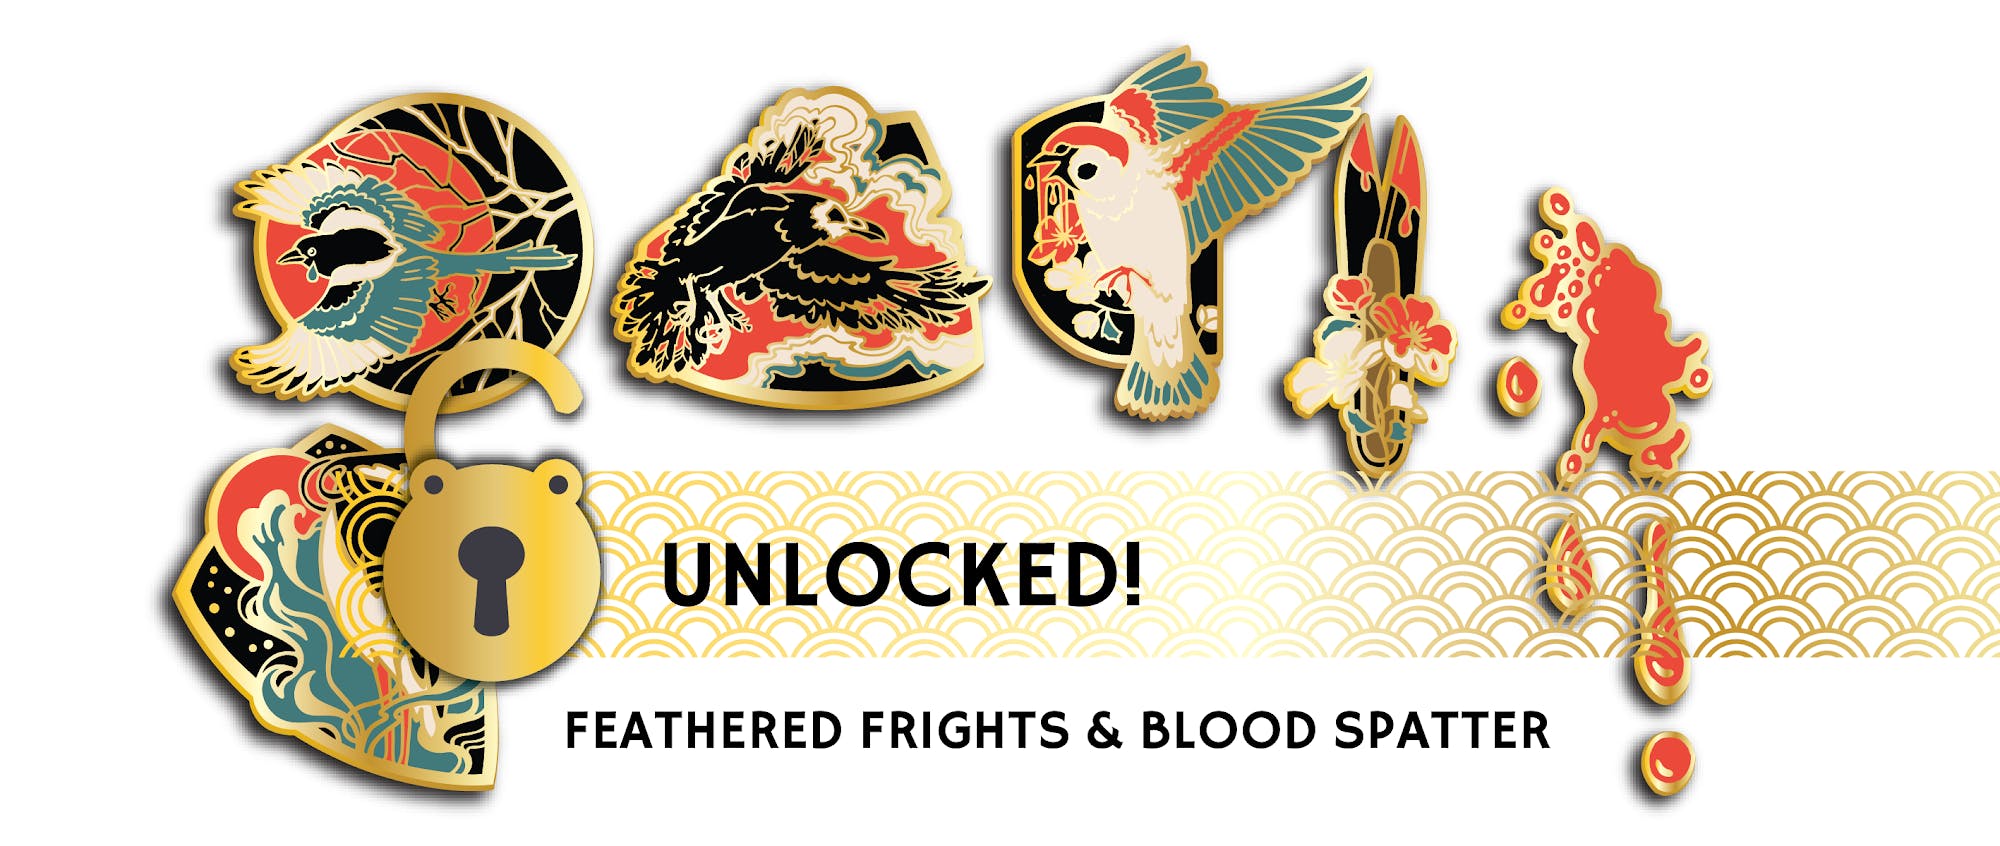 Stretch Goal #2: Unlock the Feathered Frights and Blood Spatter pins